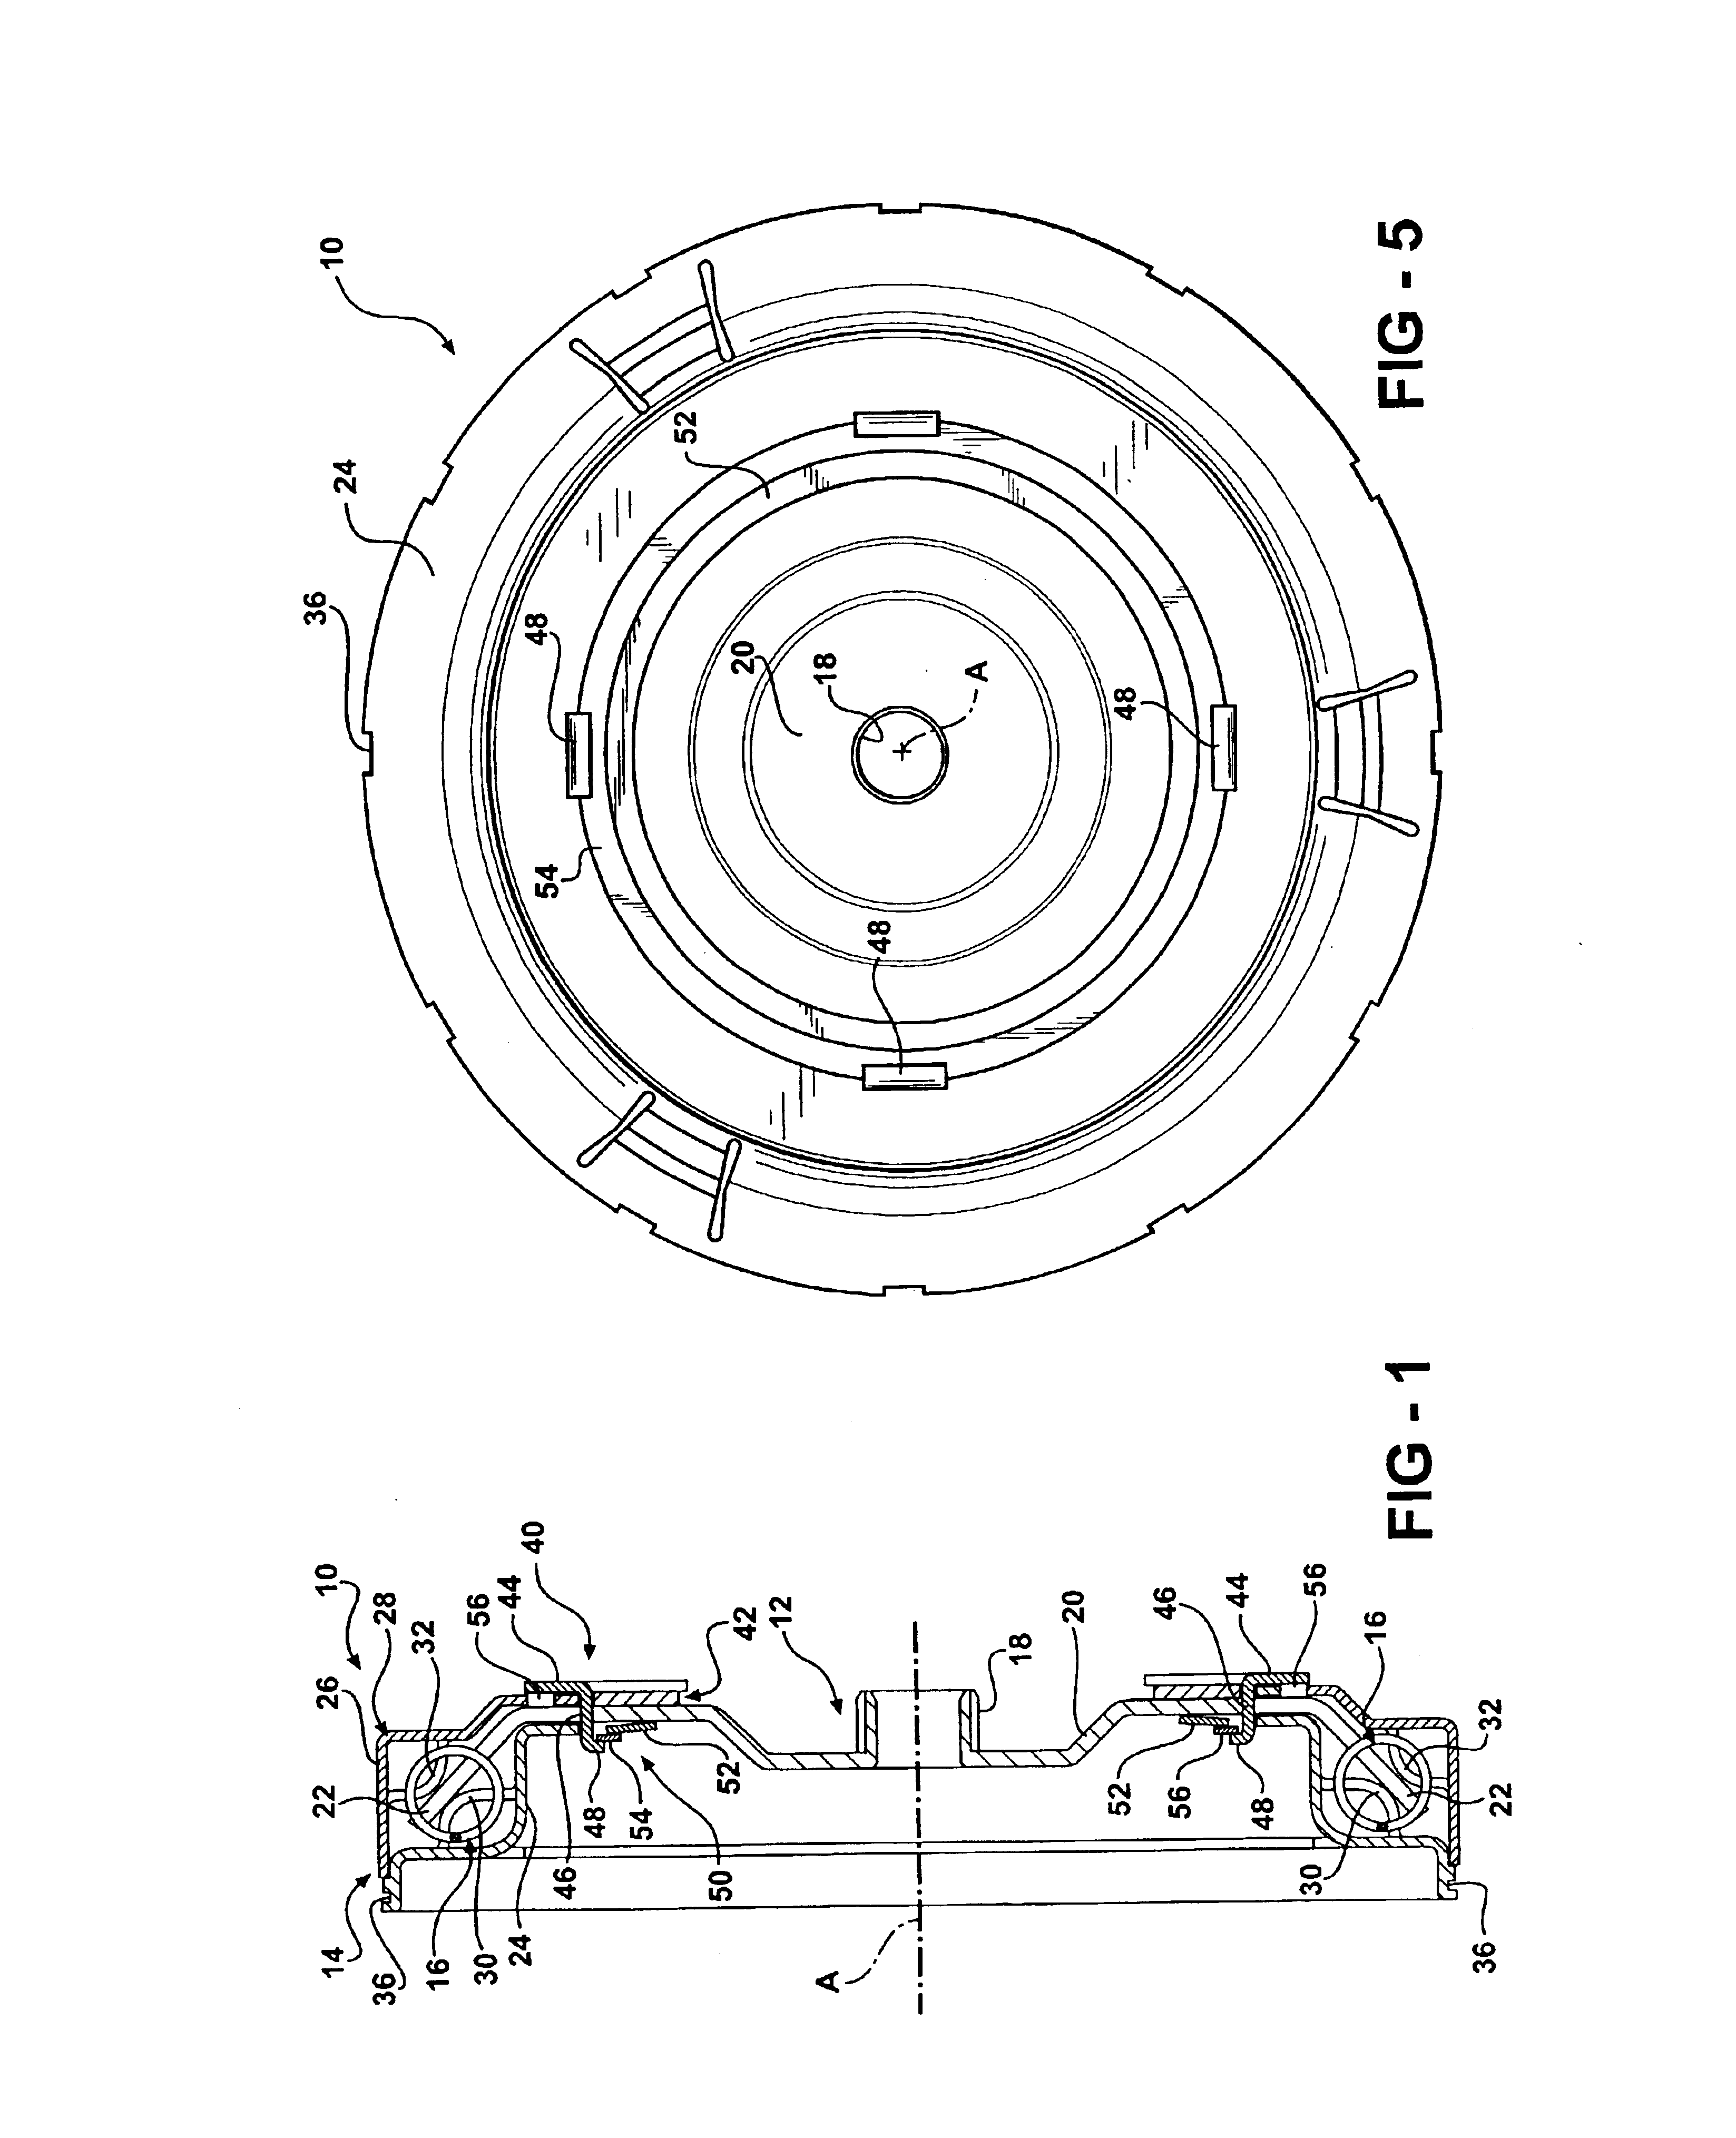 Torsional damper having variable bypass clutch with centrifugal release mechanism